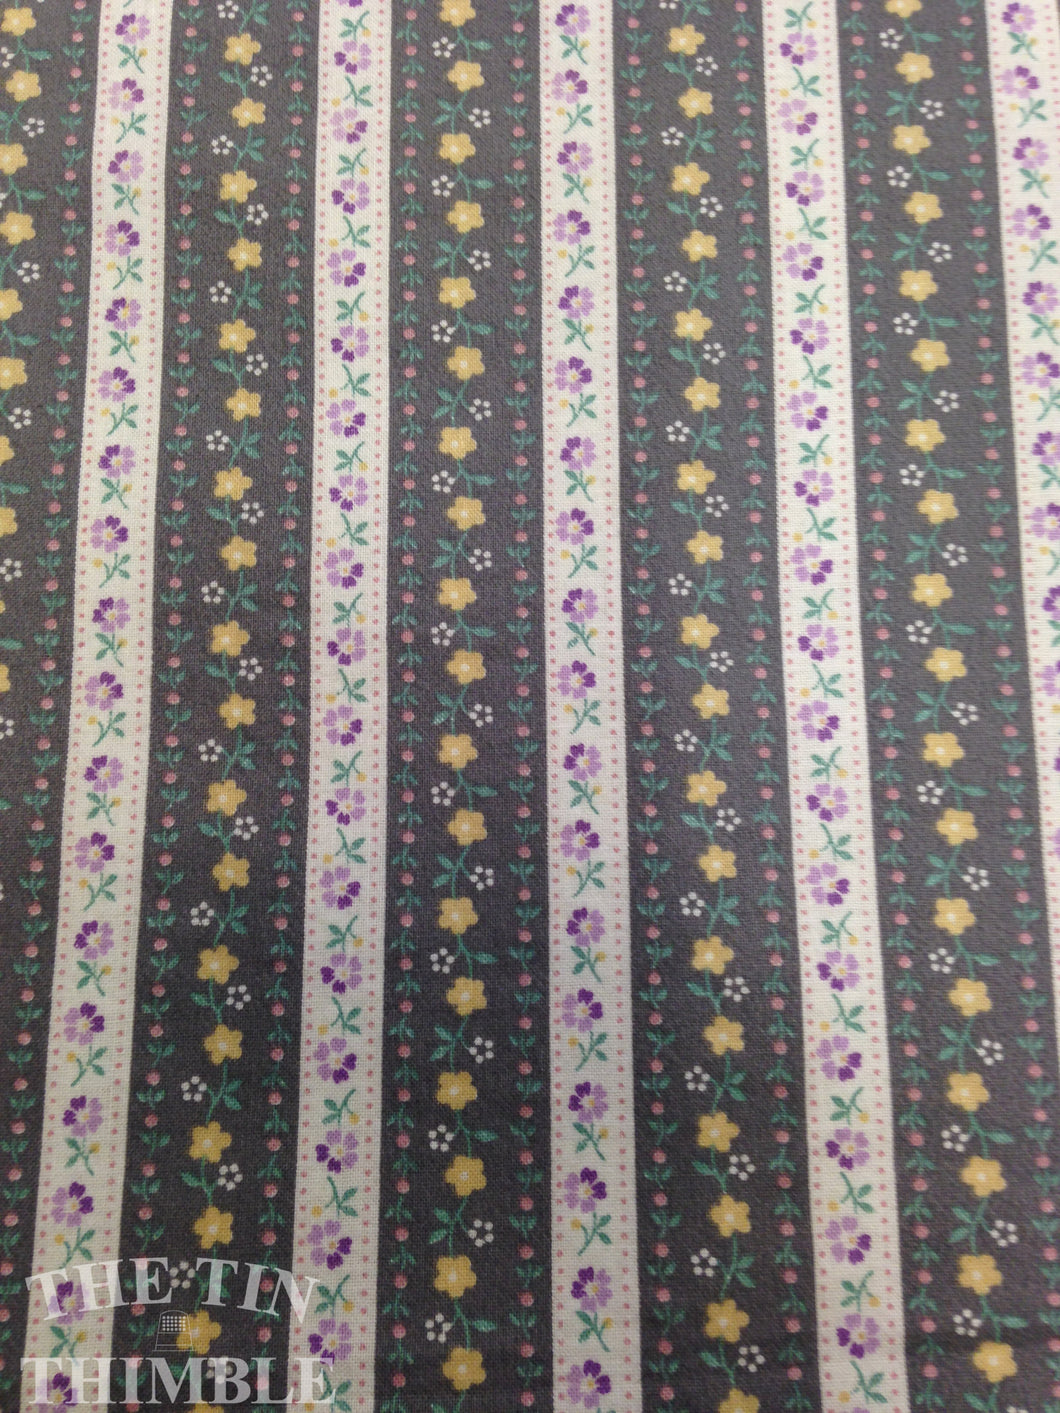 1970s Floral Striped Vintage Fabric - 1 3/4 Yards Cotton